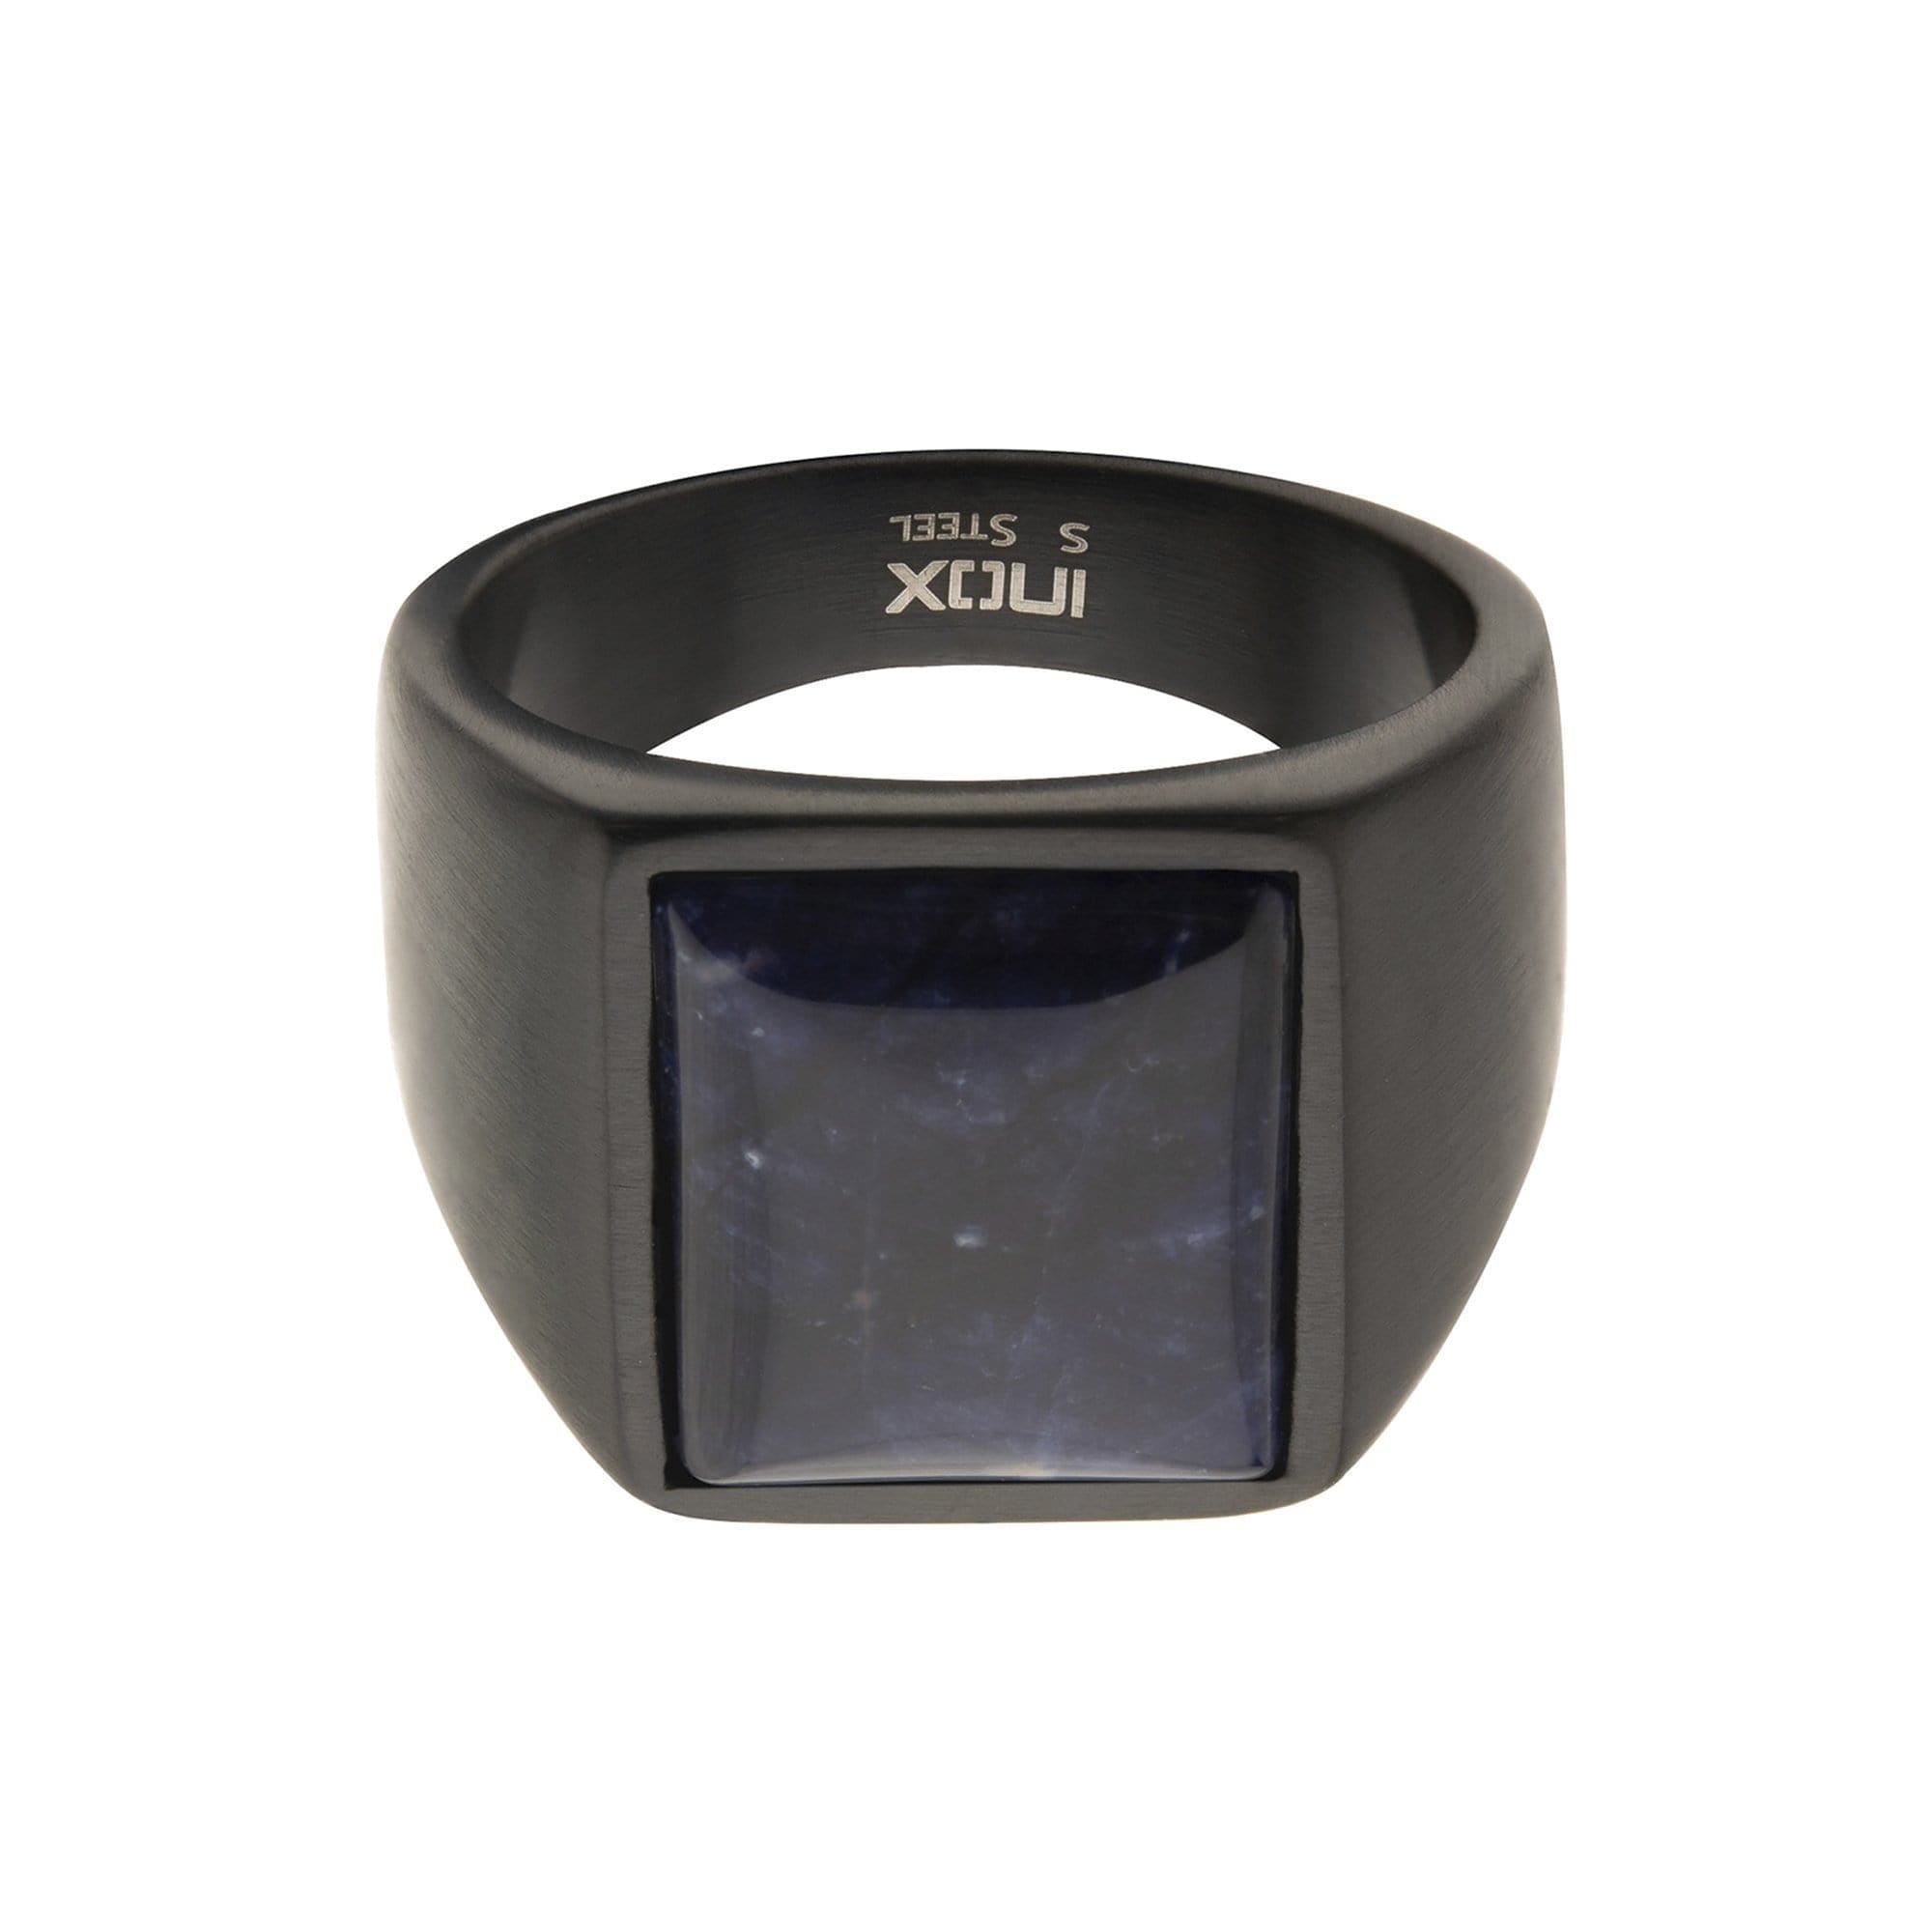 INOX JEWELRY Rings Black Stainless Steel Matte Finish with Polished Sodalite Stone Signet Ring